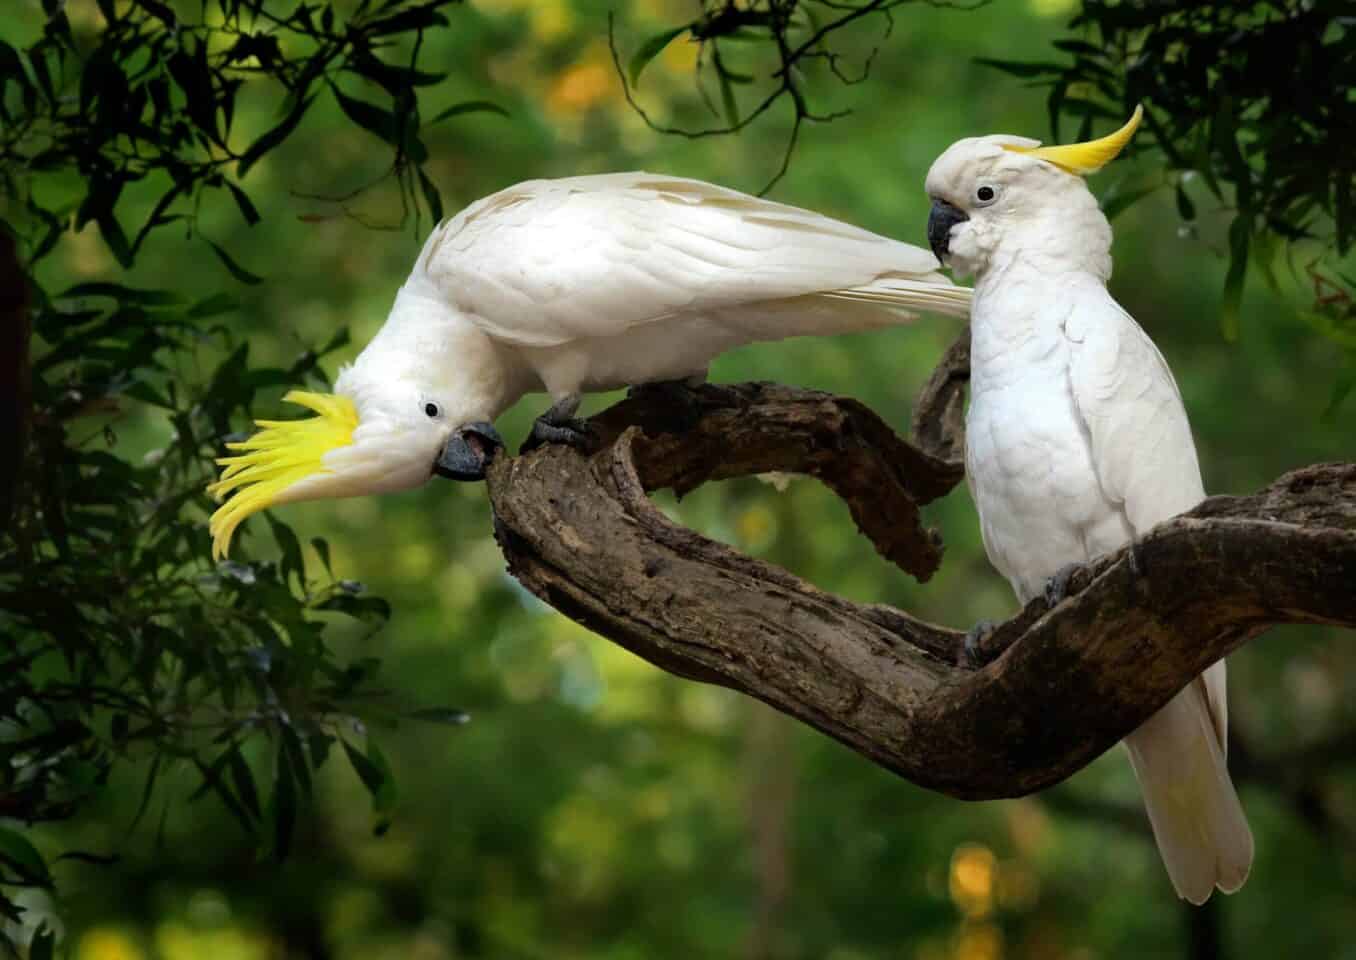 Greater Sulphur Crested Cockatoos